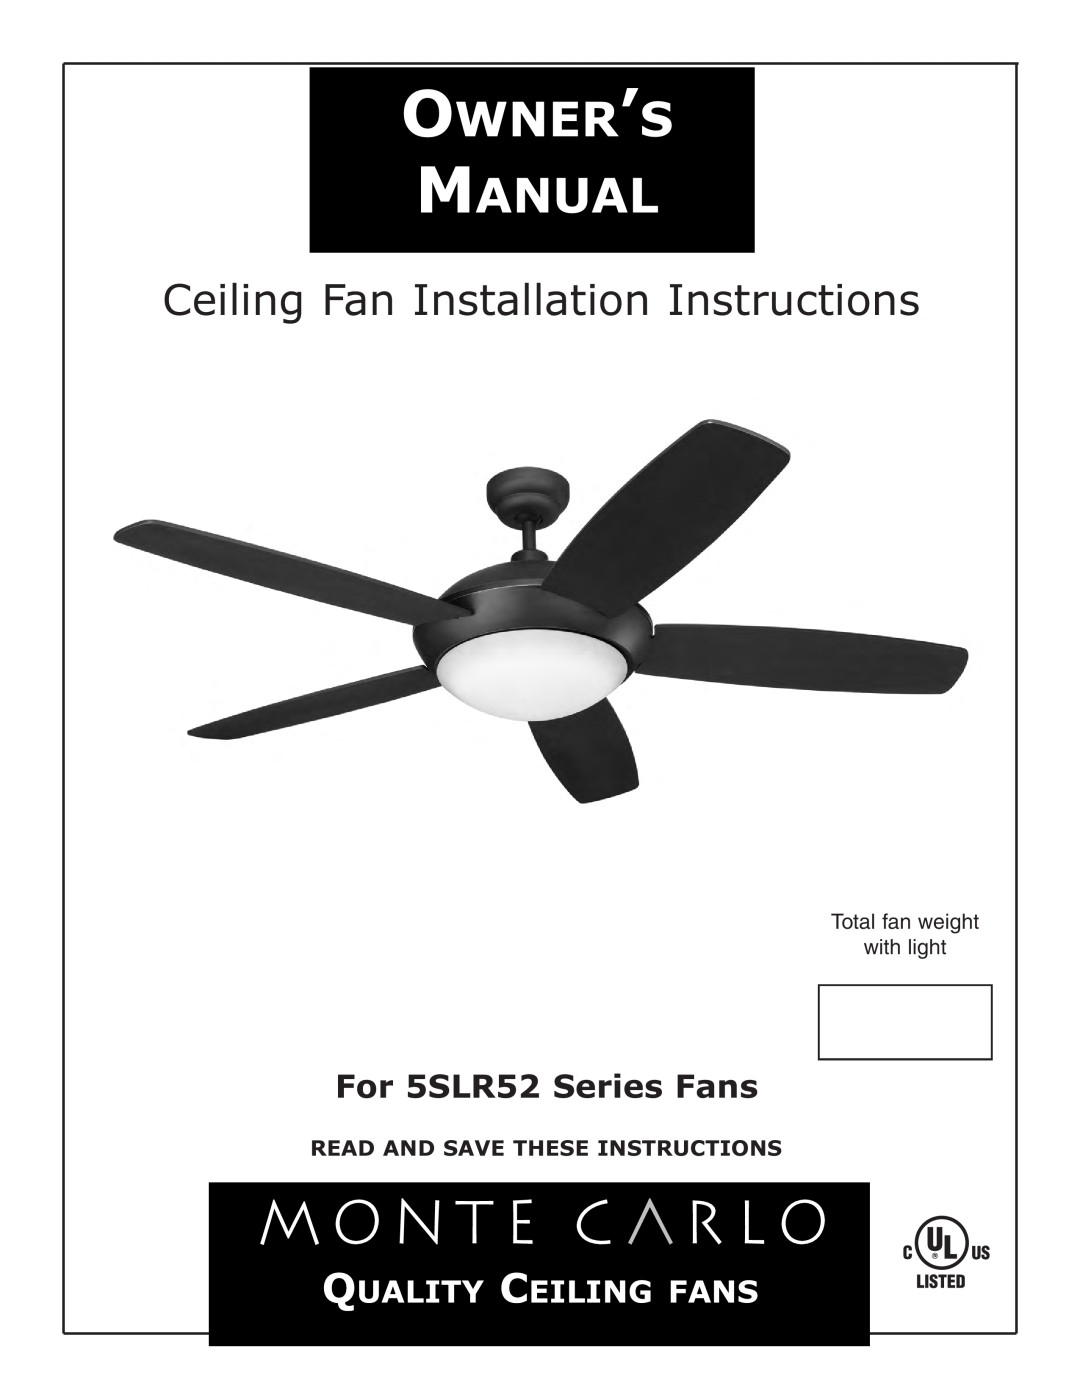 Monte Carlo Fan Company 5SLR52 owner manual Read And Save These Instructions, Ceiling Fan Installation Instructions 